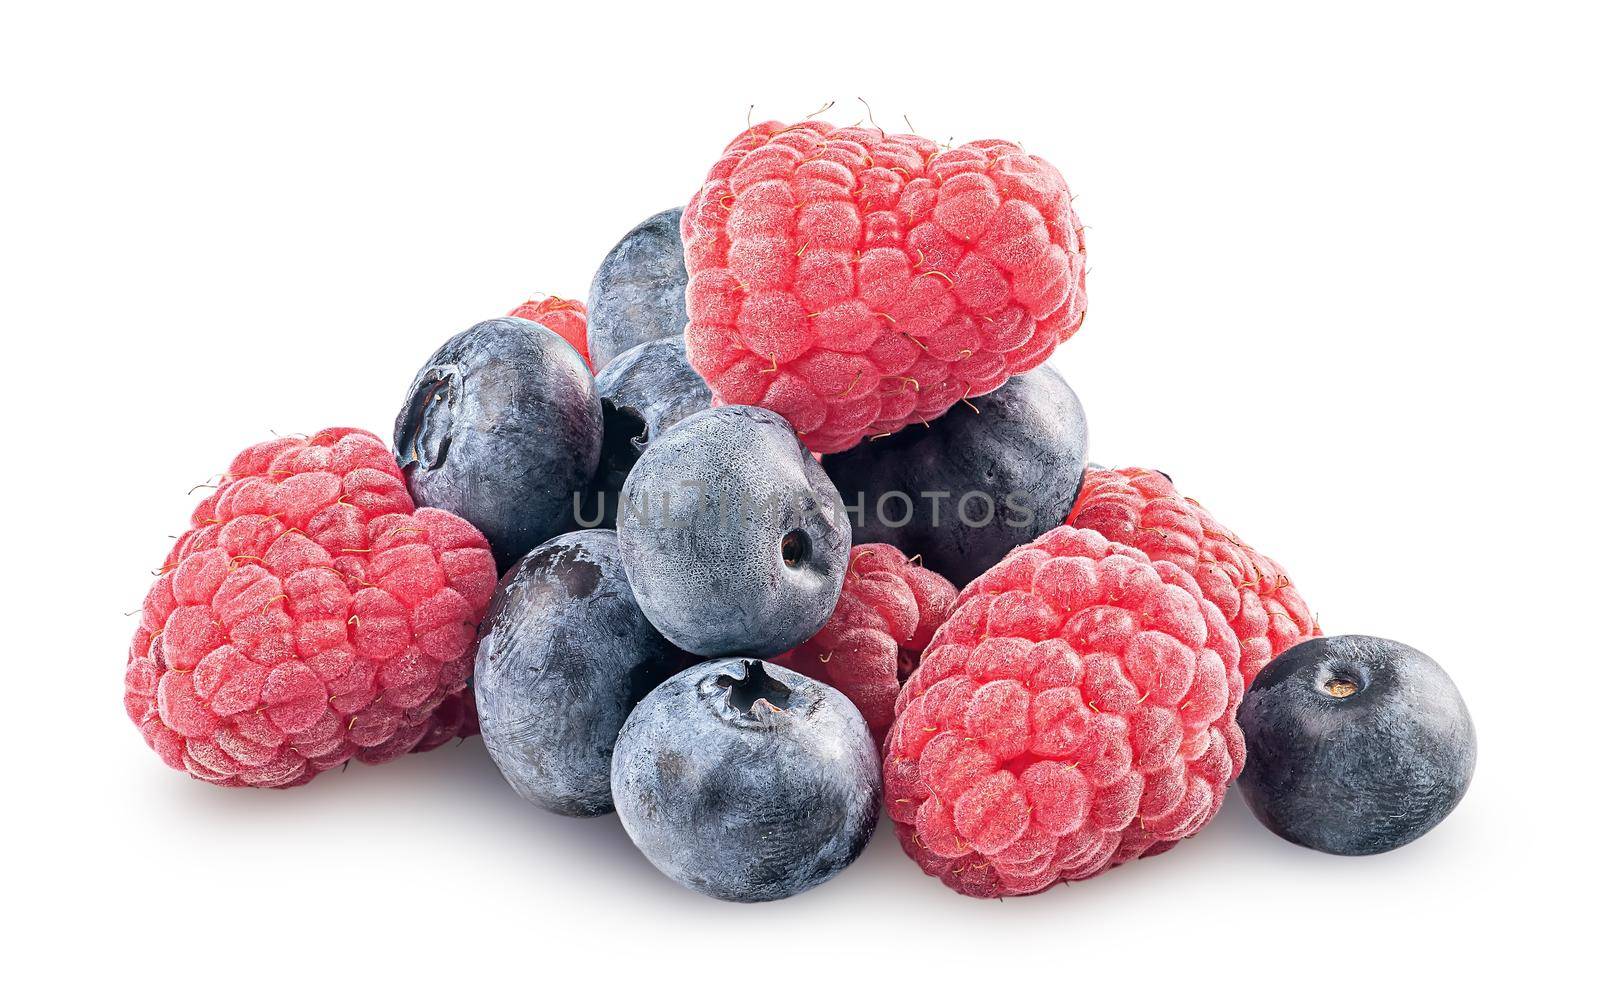 Heap of raspberries and blueberries isolated on white by Cipariss